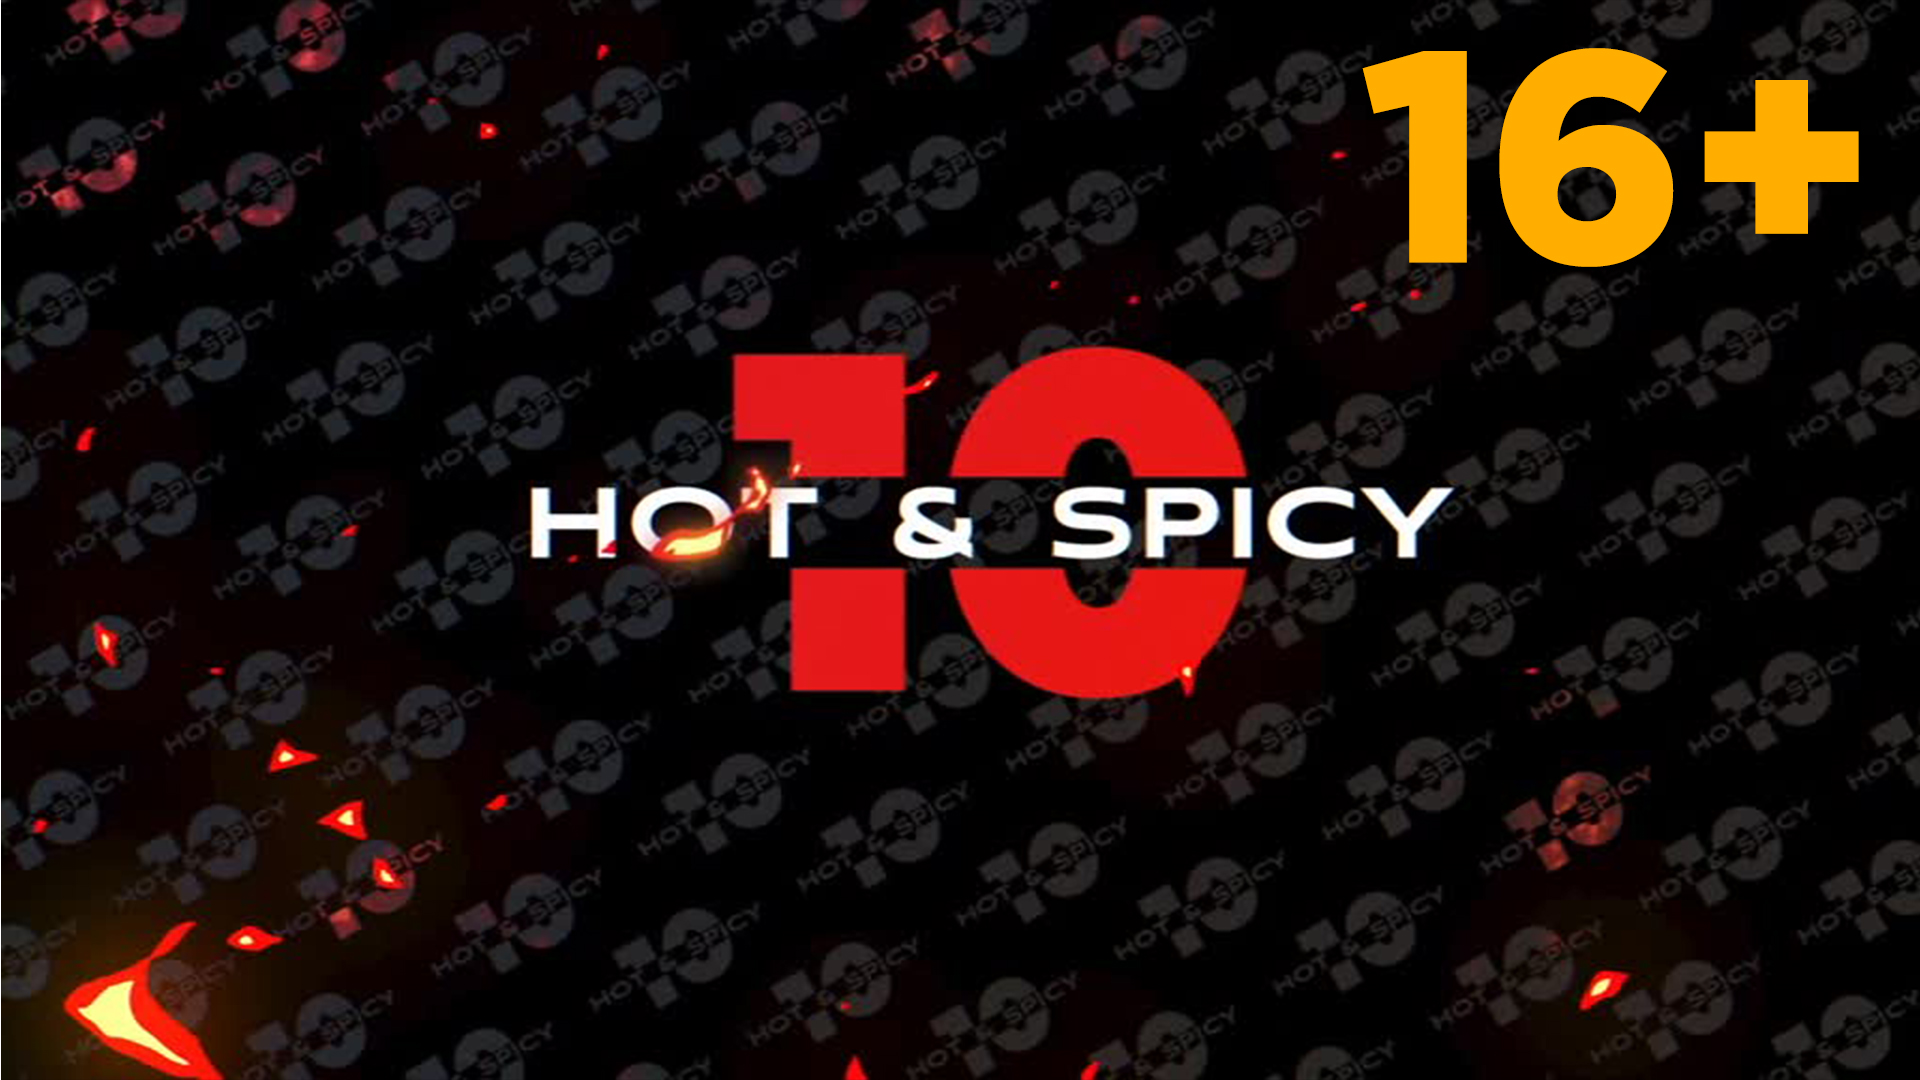 HOT & SPICY